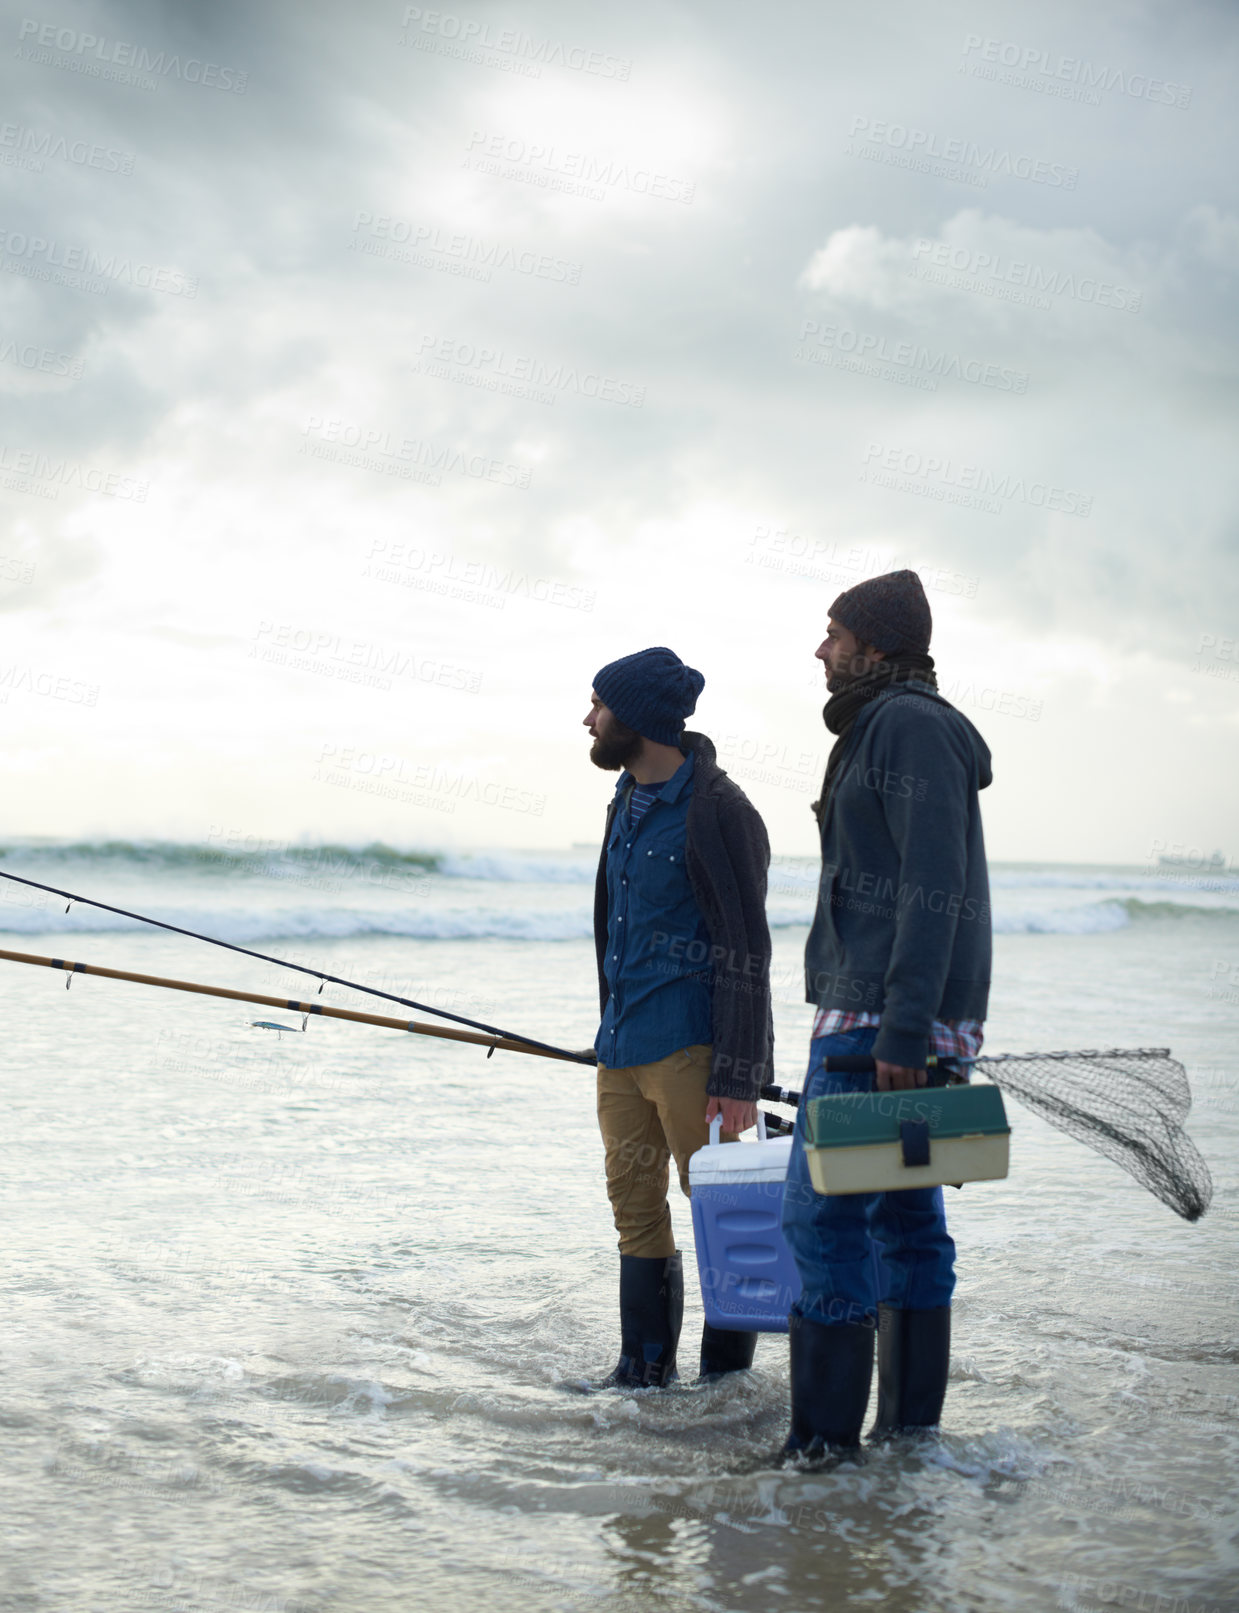 Buy stock photo Fisherman, friends and gear on beach for fishing in the morning by sea with overcast, equipment and sky. Friendship, men and net with bonding, travel or rod by water for hobby, holiday or activity